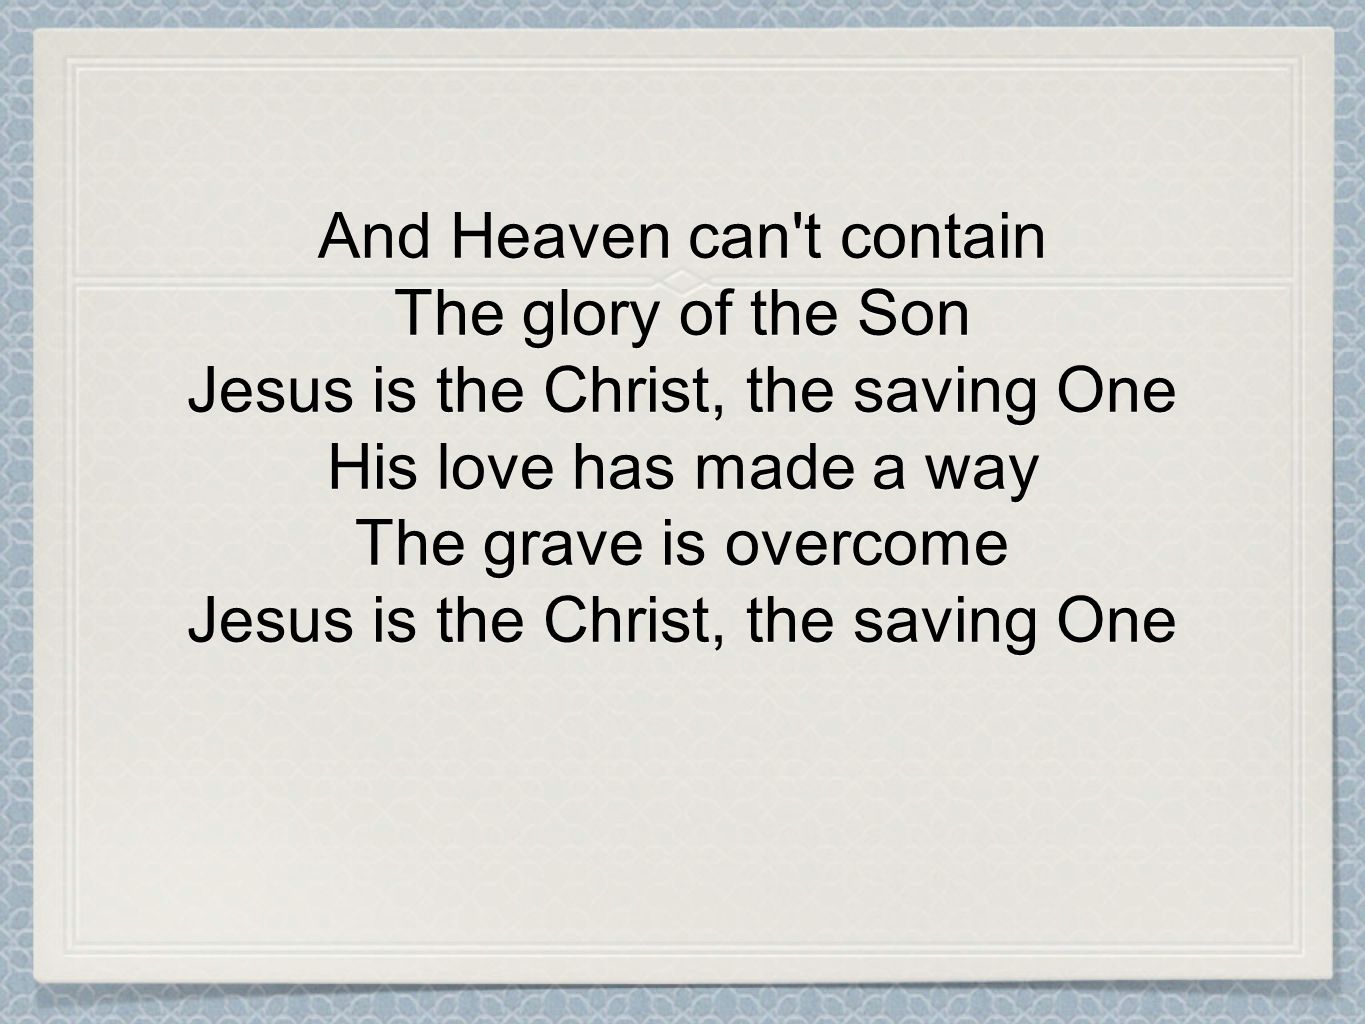 And Heaven can t contain The glory of the Son Jesus is the Christ, the saving One His love has made a way The grave is overcome Jesus is the Christ, the saving One